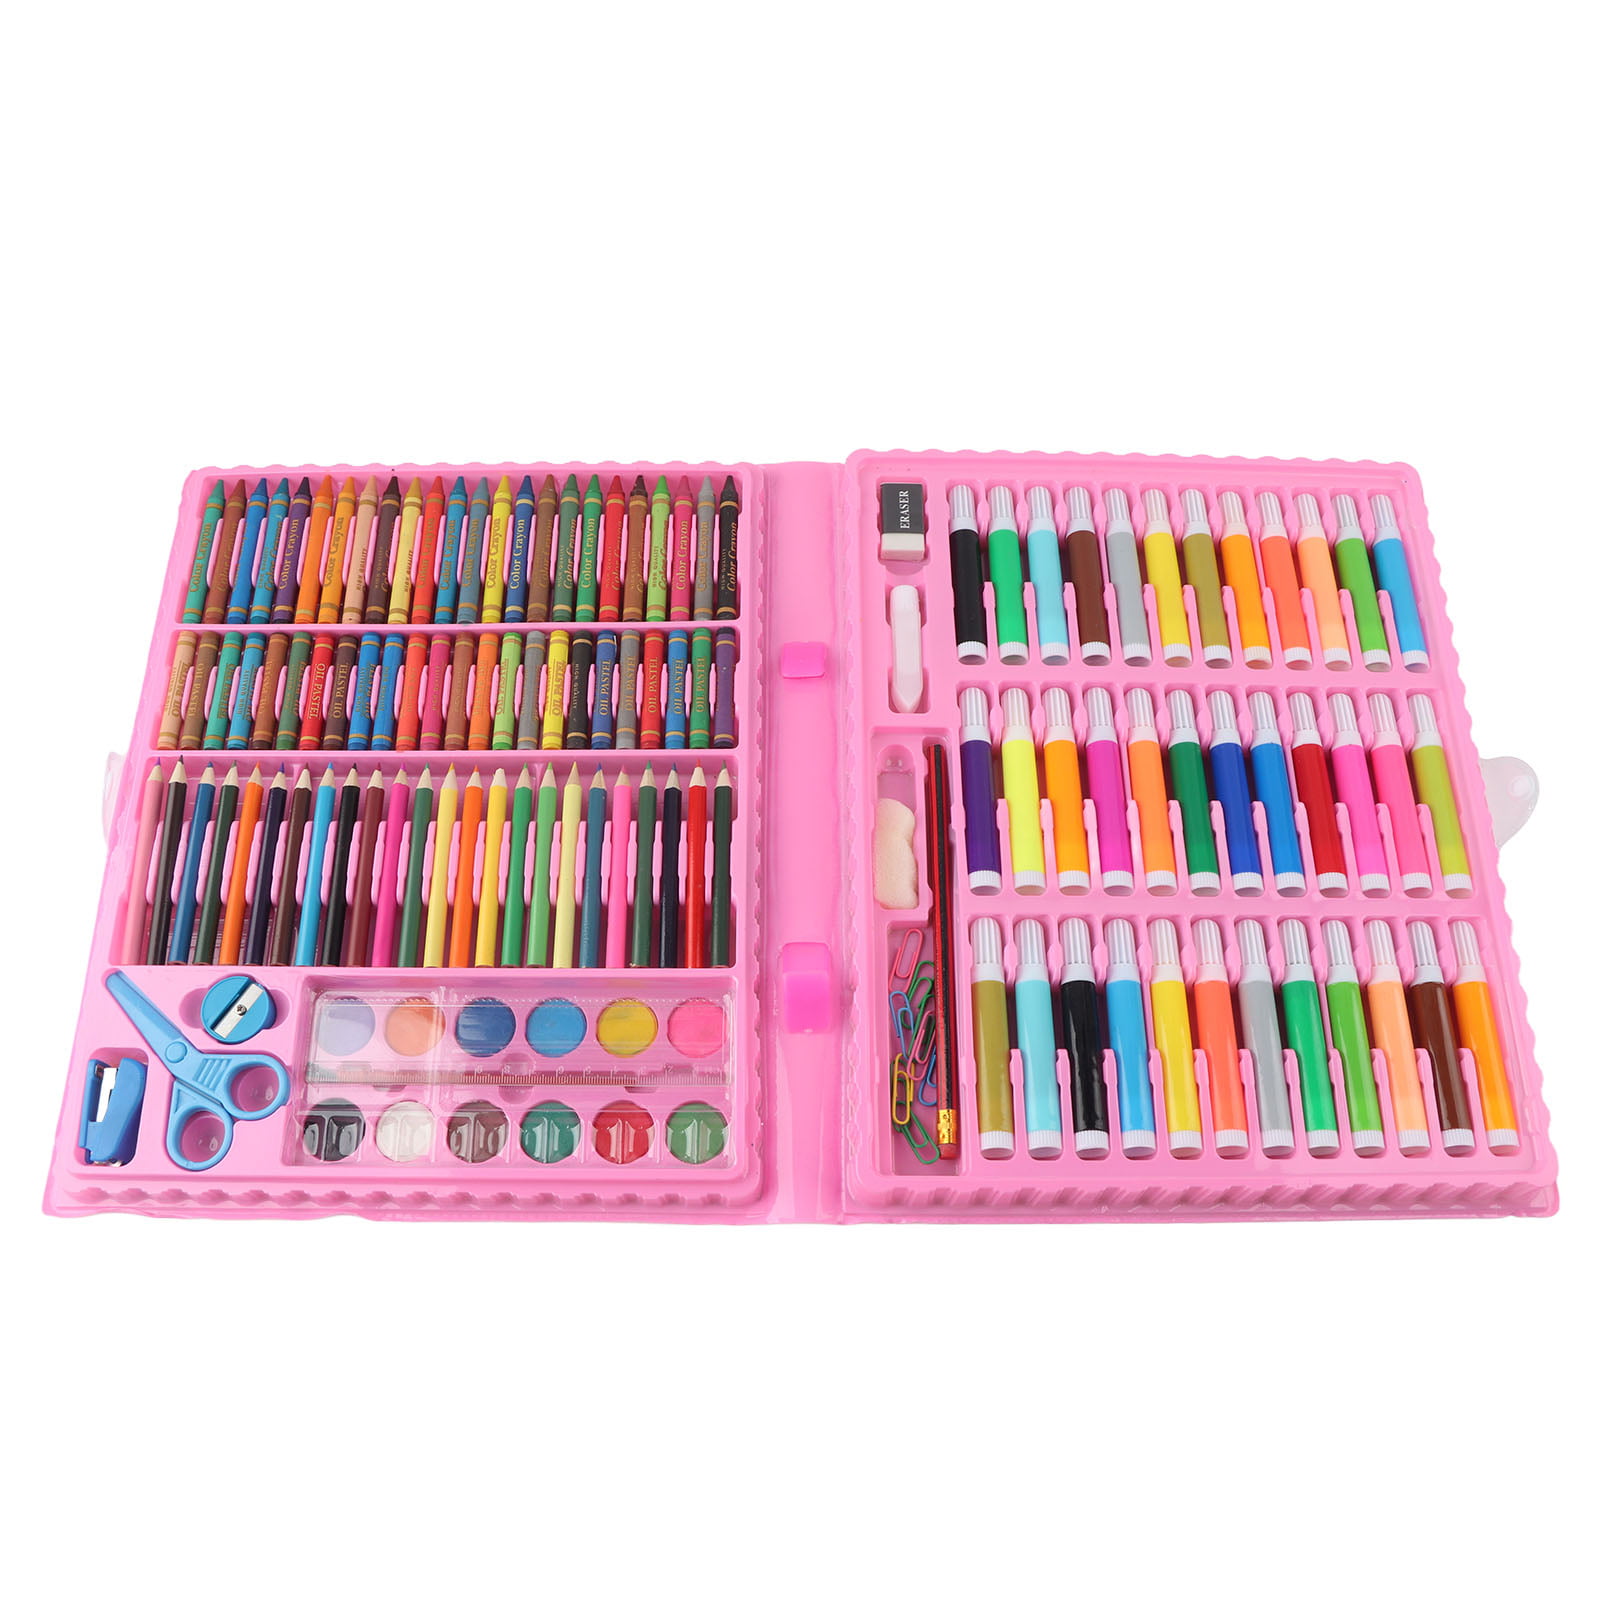 Moiky Art Set for Kids,150 Piece Deluxe Art Supplies Kit,with Paint Markers  Pens/Crayons/Oil Pastels/Colored Pencils/Watercolor Paint Portable Case 